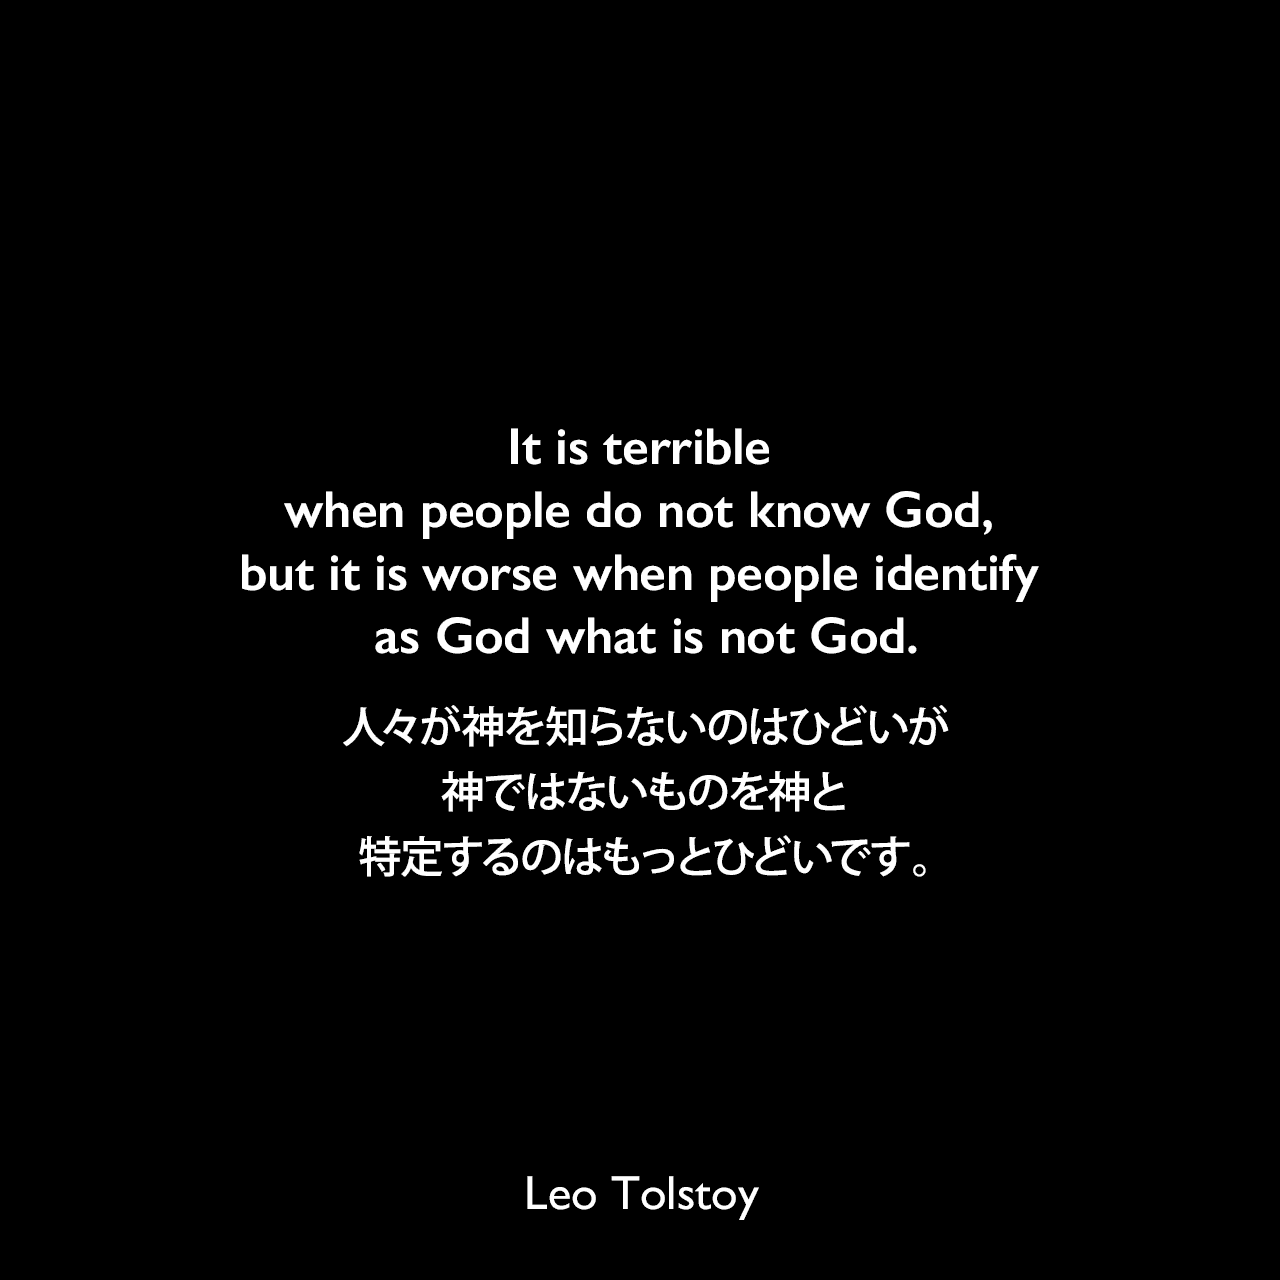 It is terrible when people do not know God, but it is worse when people identify as God what is not God.人々が神を知らないのはひどいが、神ではないものを神と特定するのはもっとひどいです。- トルストイによる本「The Pathway of Life」よりLeo Tolstoy